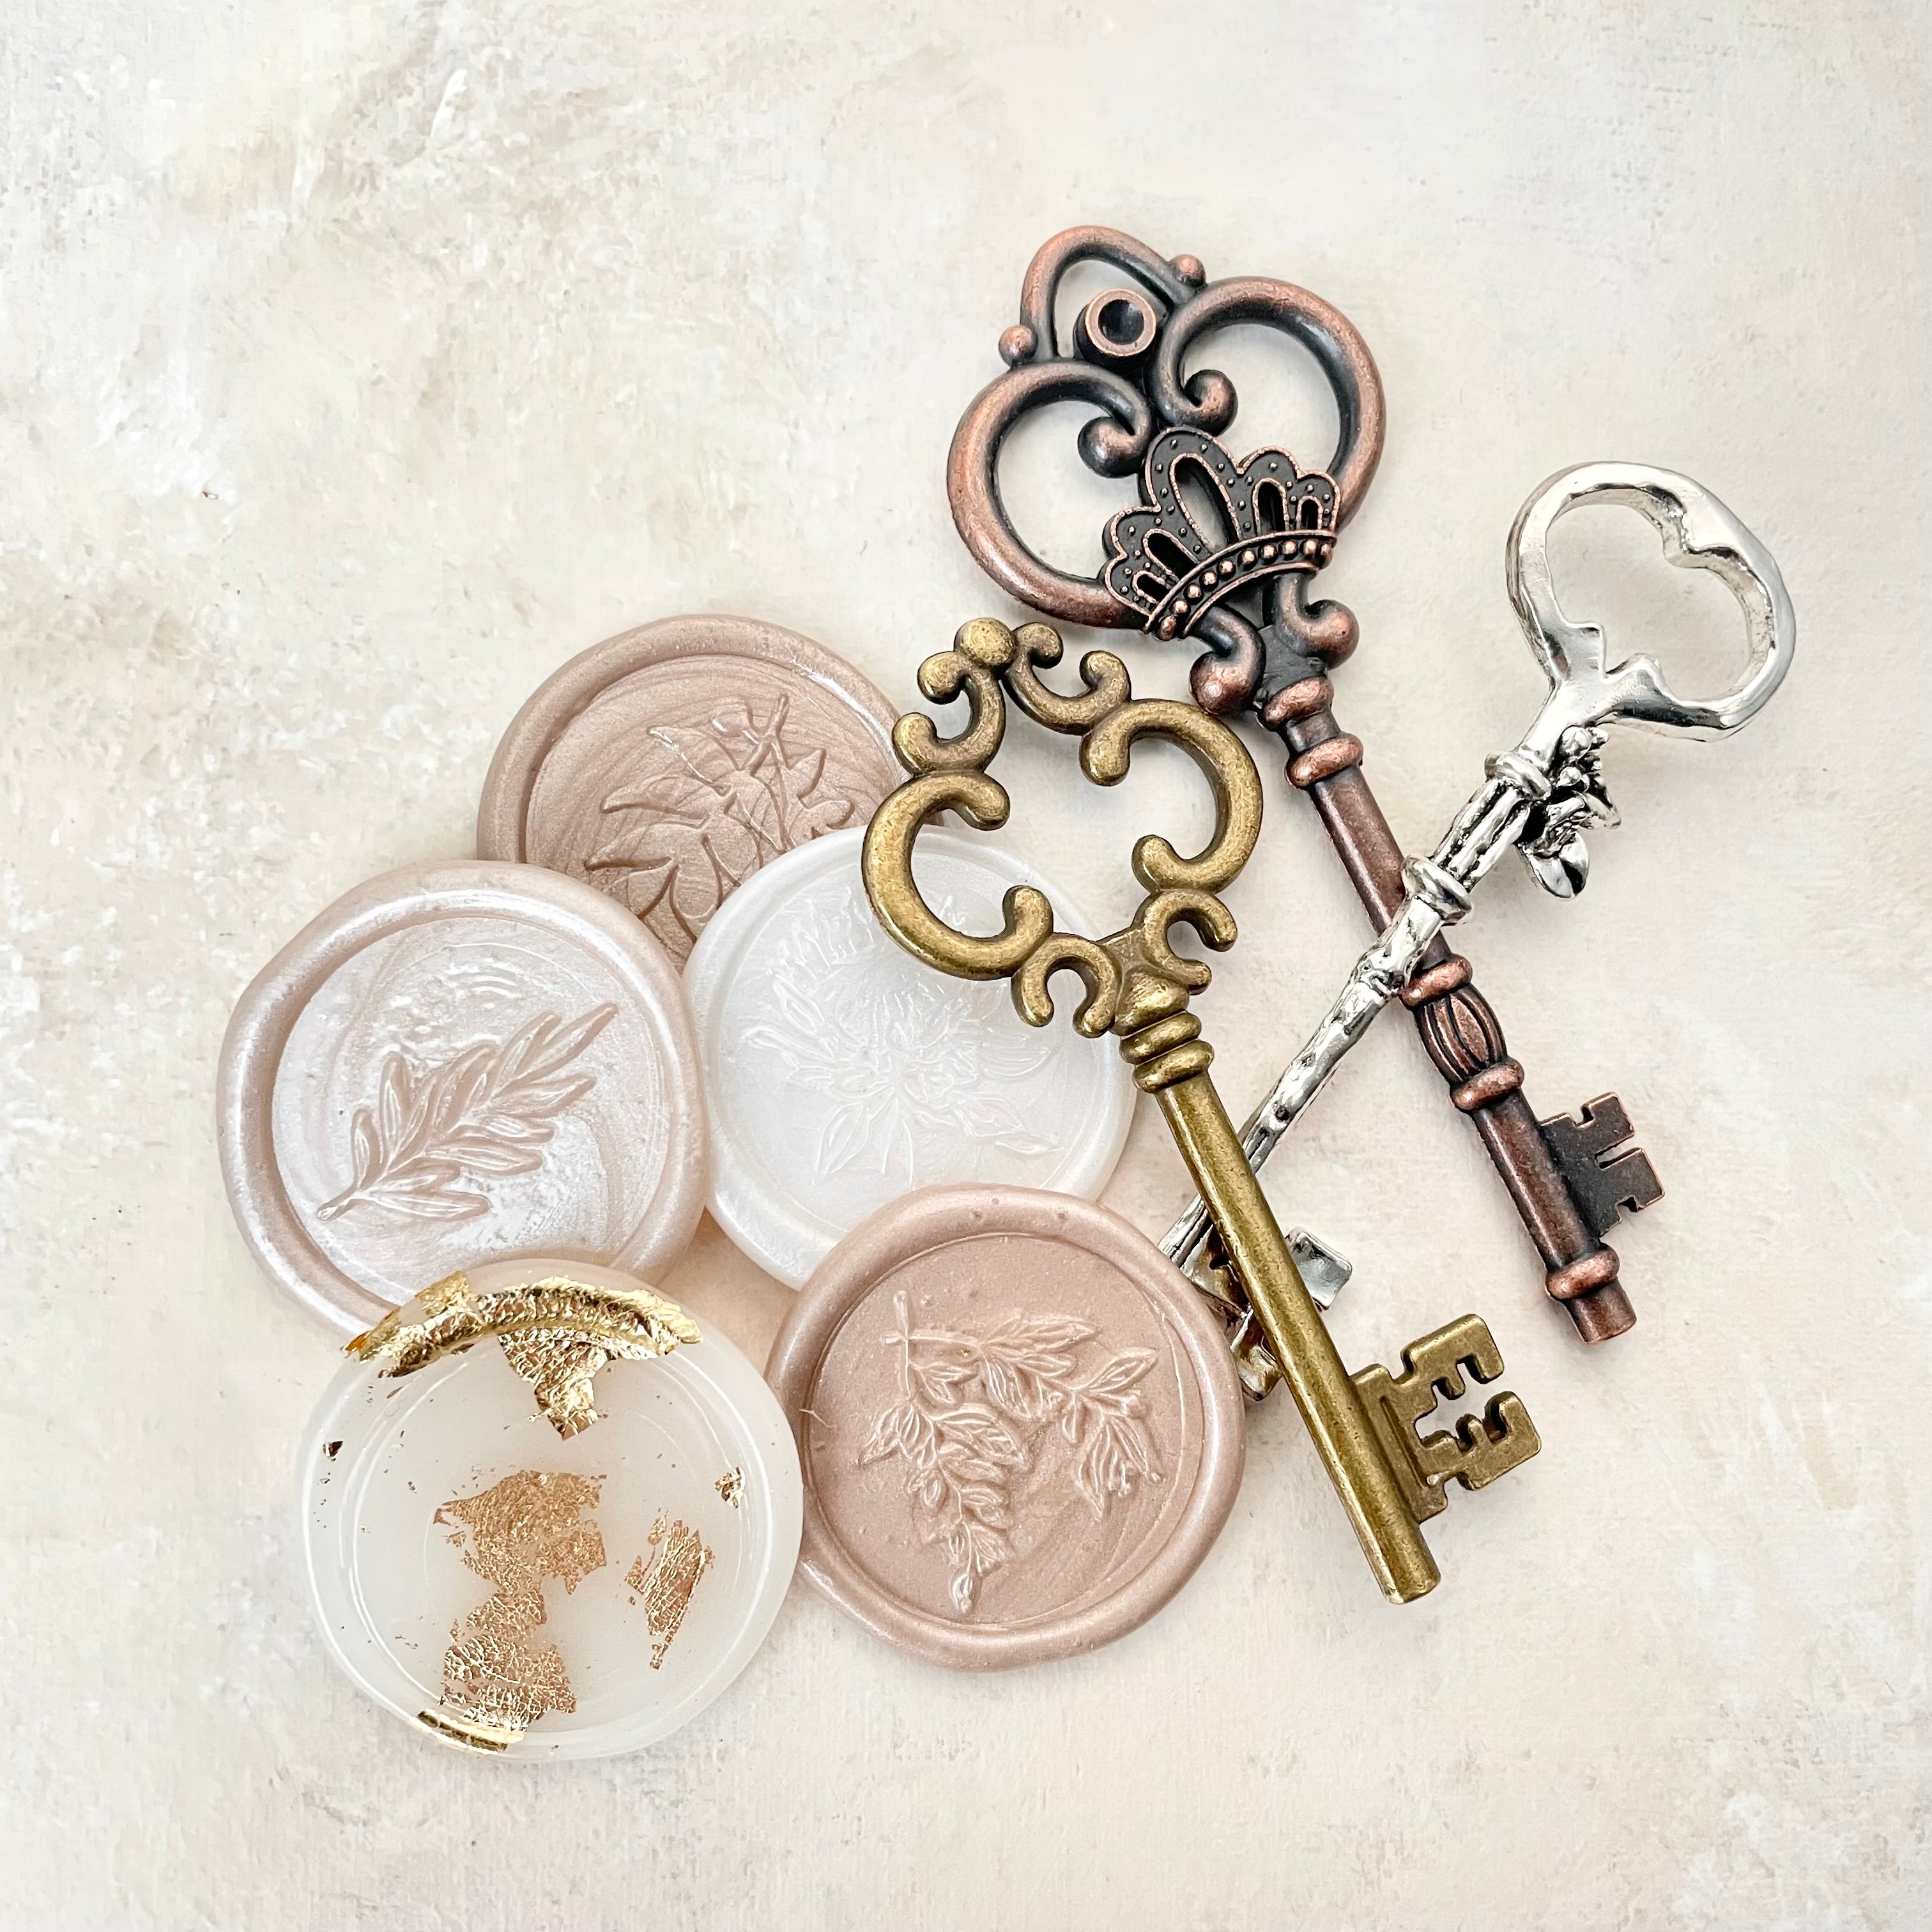 Champagne Flatlay Styling Kit including wax seals and styling keys - must have Wedding Flat lay props from Champagne & GRIT